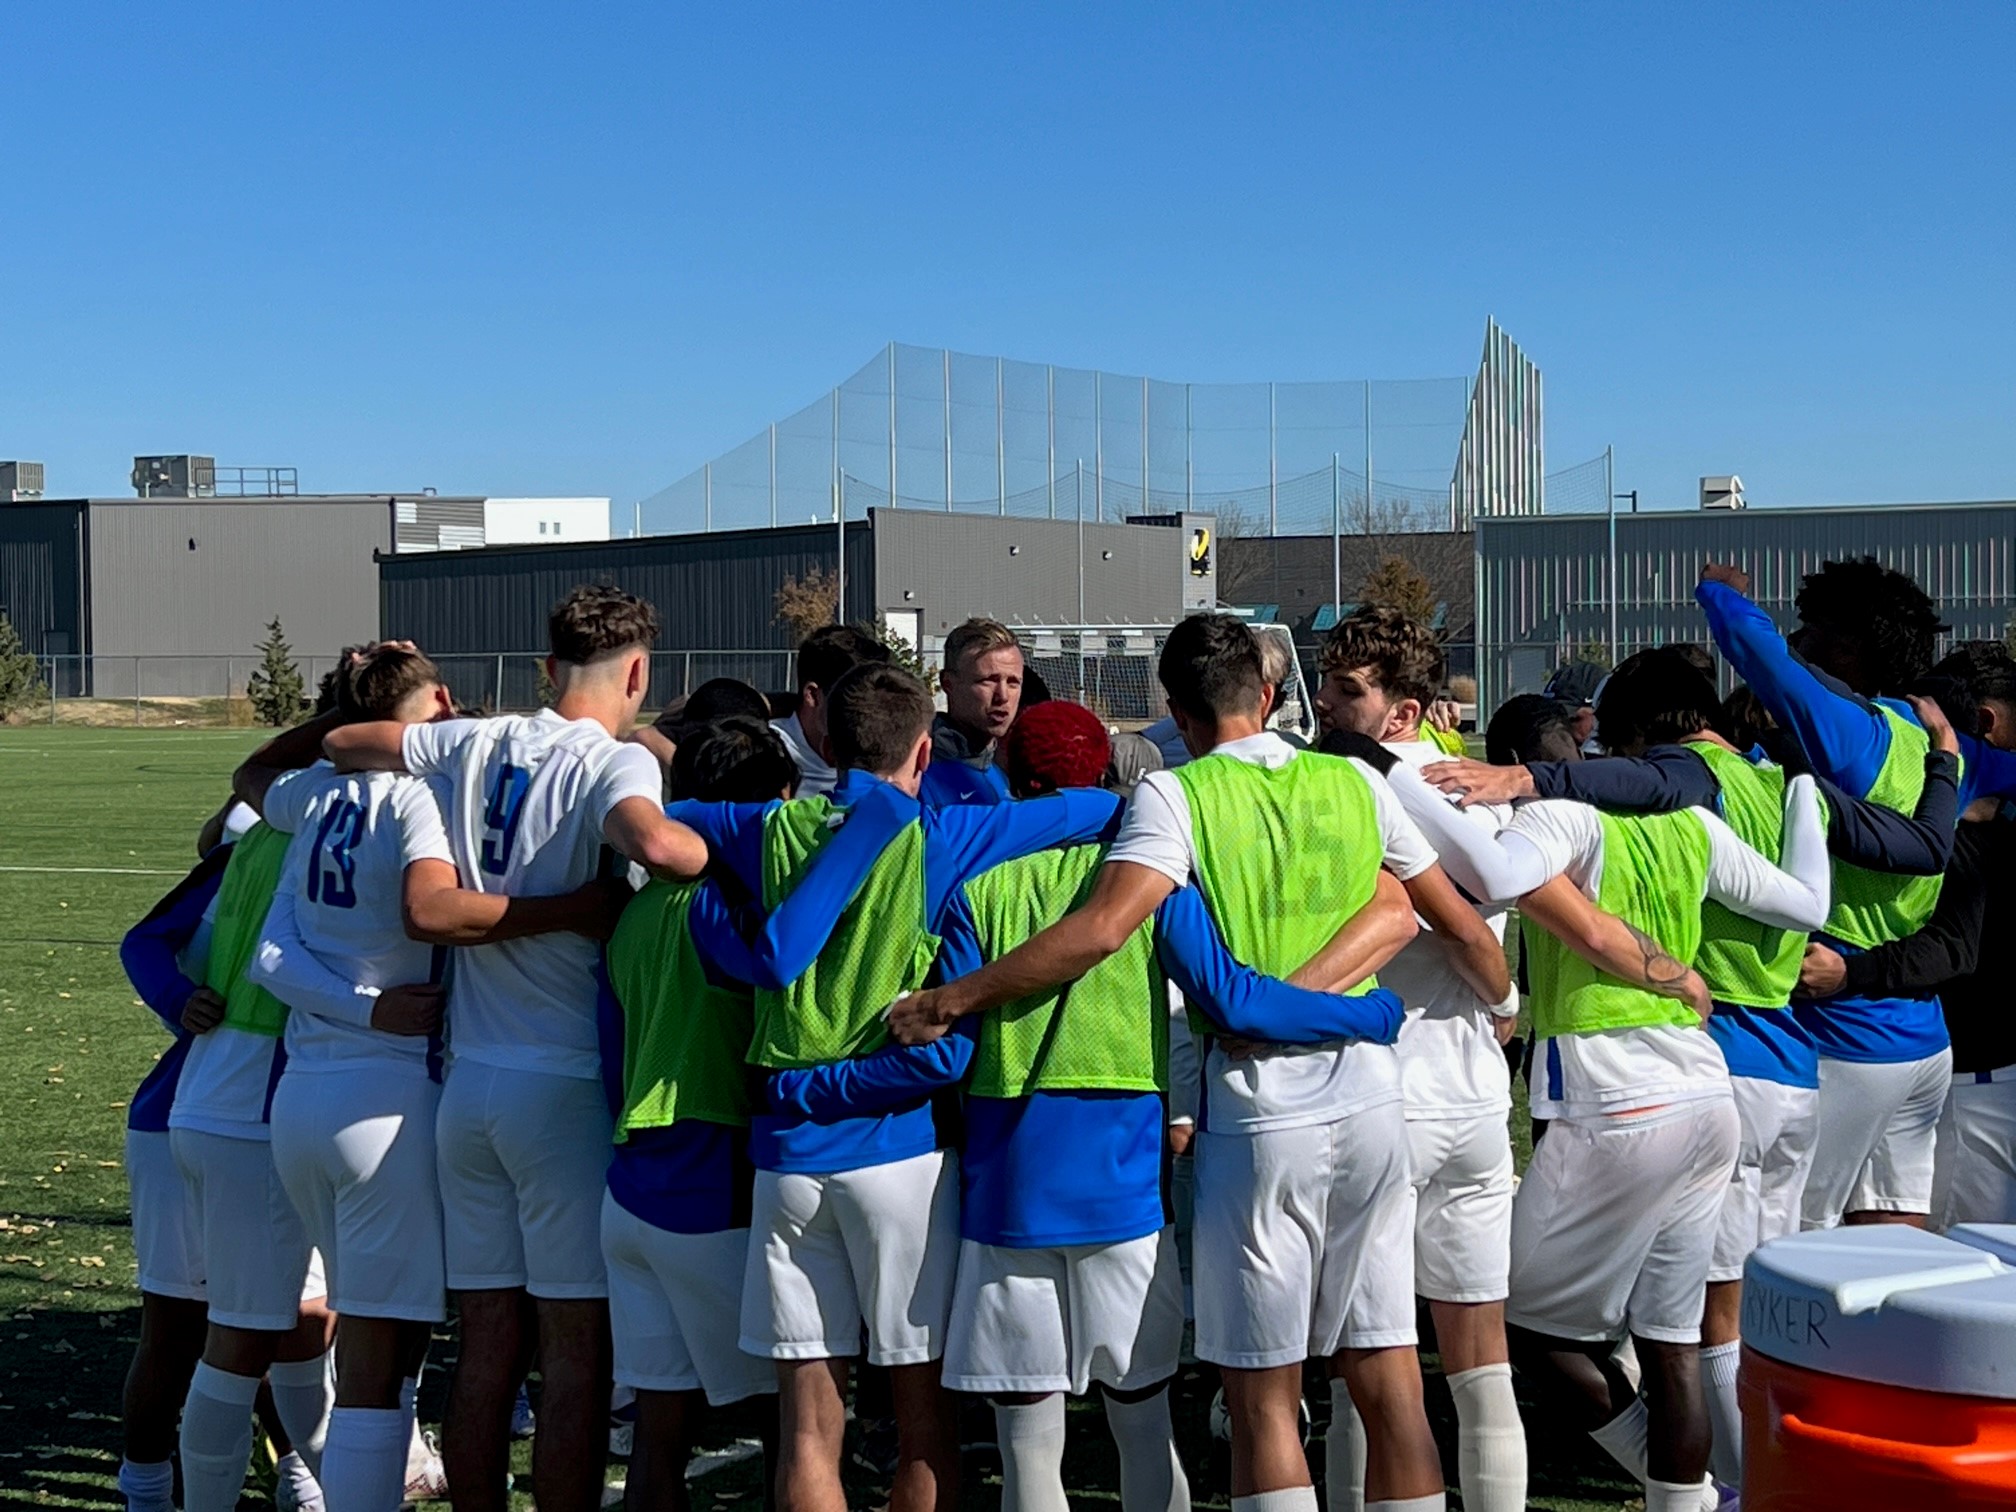 Men's soccer team faces Tyler Junior College with chance for spot in semifinals